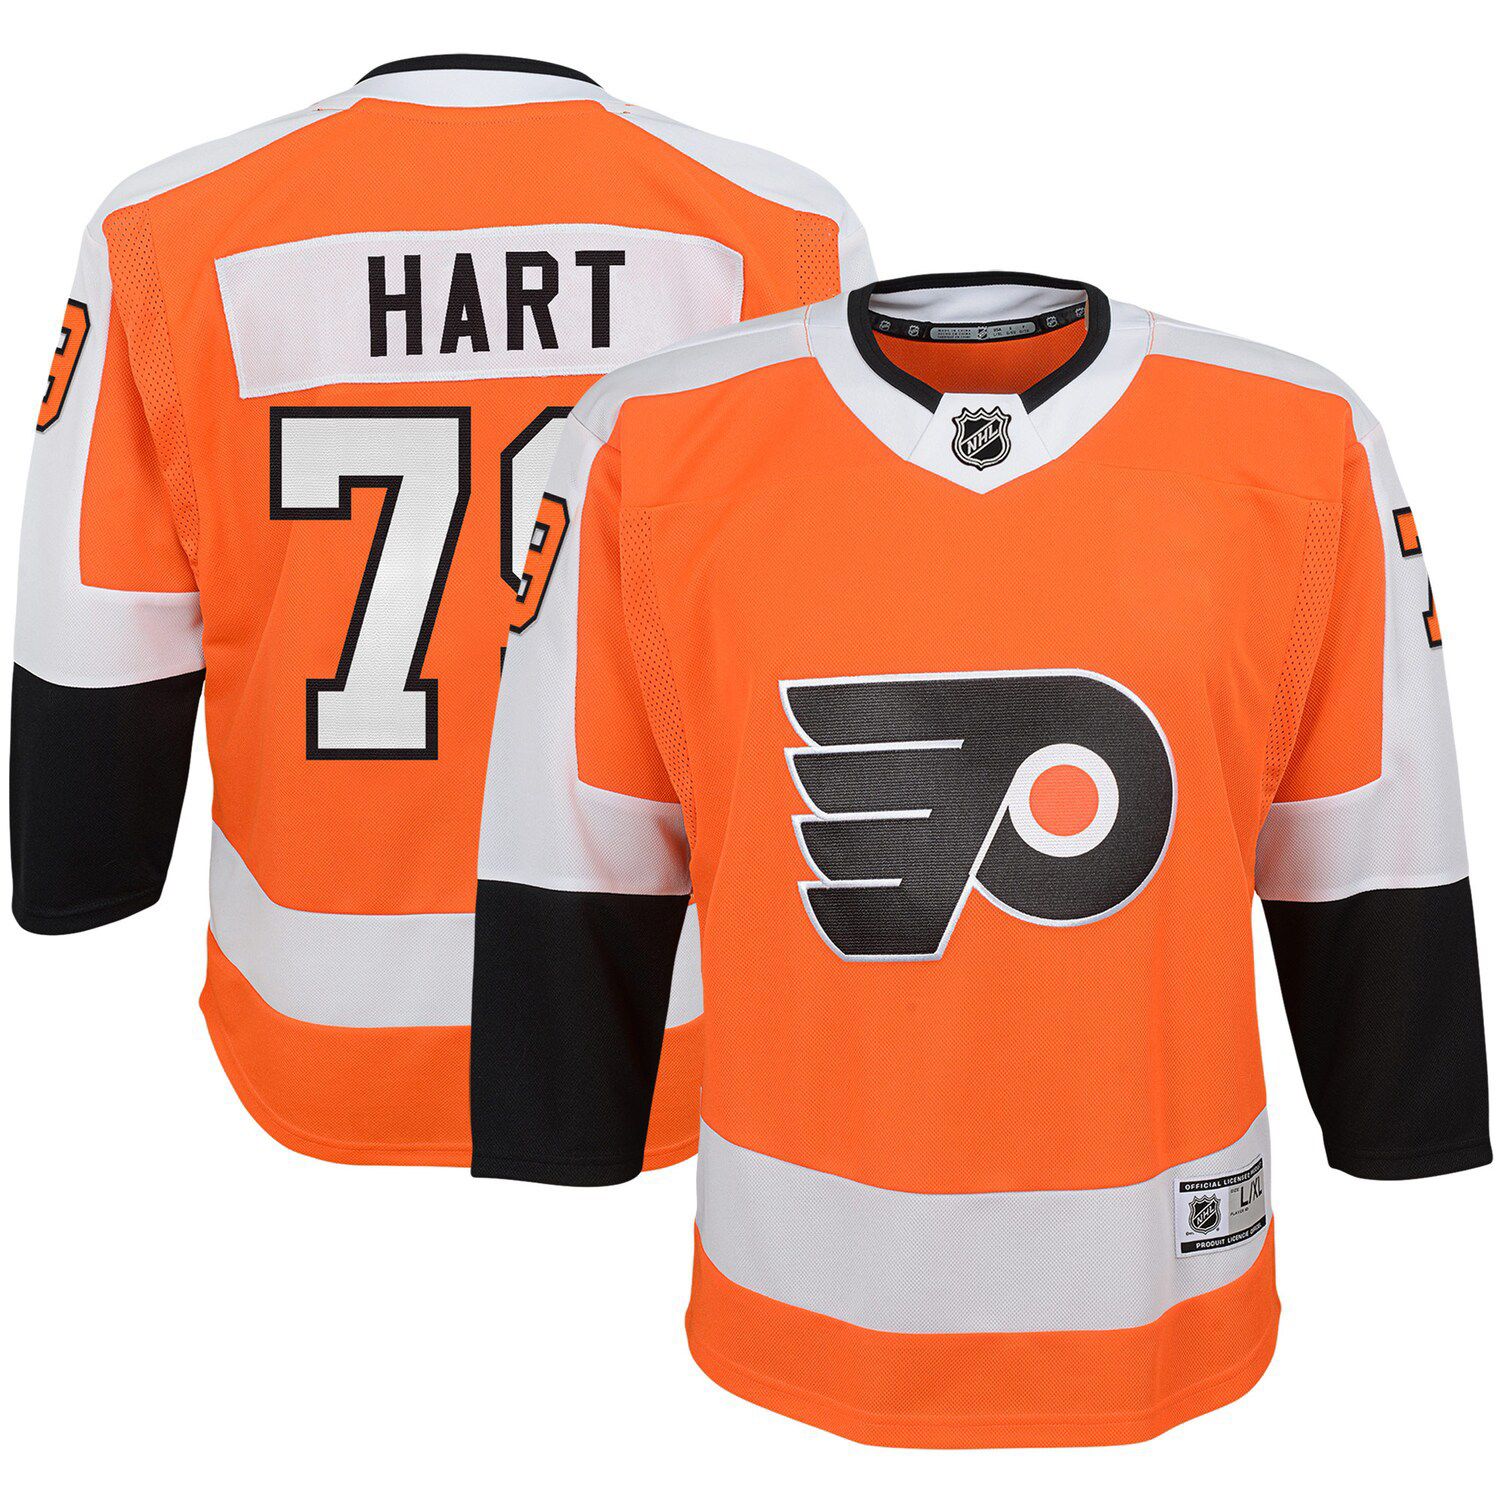 carter hart jersey youth